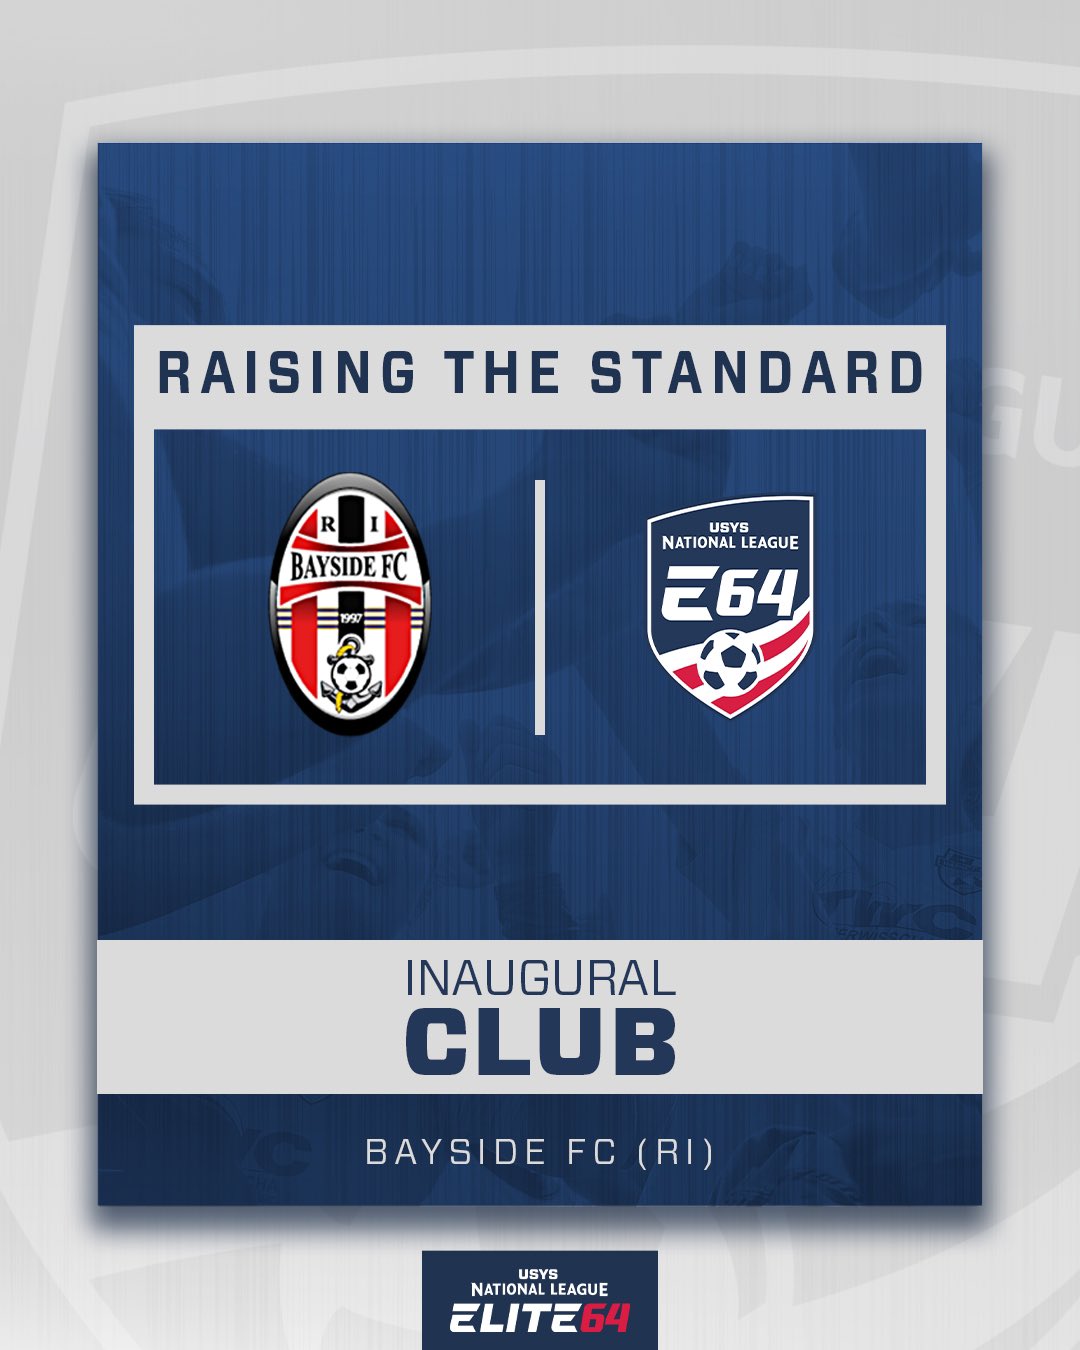 Recruiting: Why Providence is the right choice for Bayside FC's